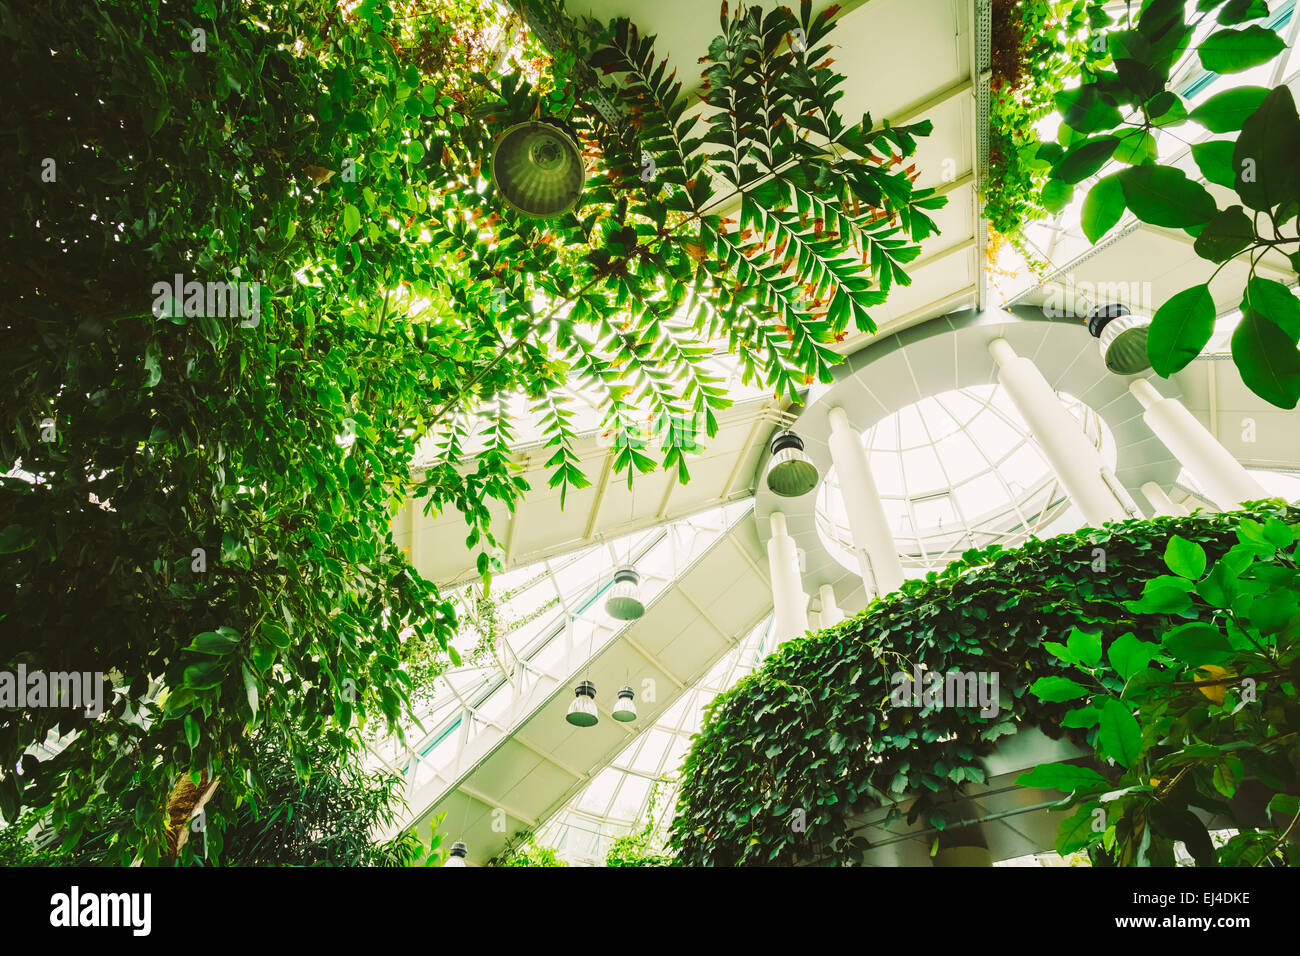 Ceiling Greenhouse With Flowers. Temperate House Conservatory, Botanical Gardens. Stock Photo